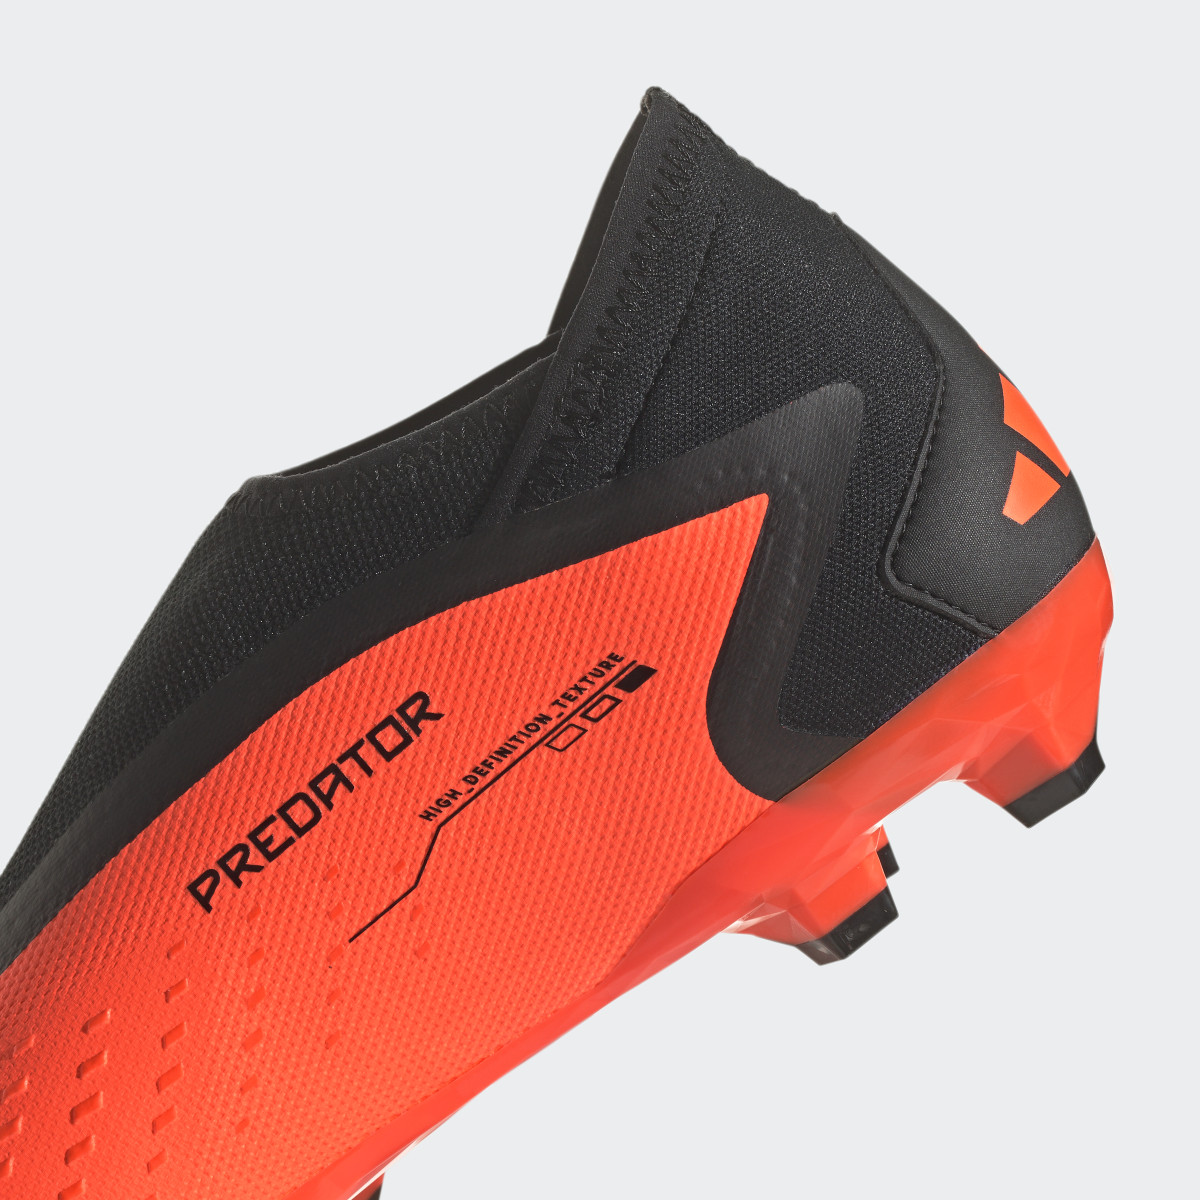 Adidas Predator Accuracy.3 Laceless Firm Ground Soccer Cleats. 10